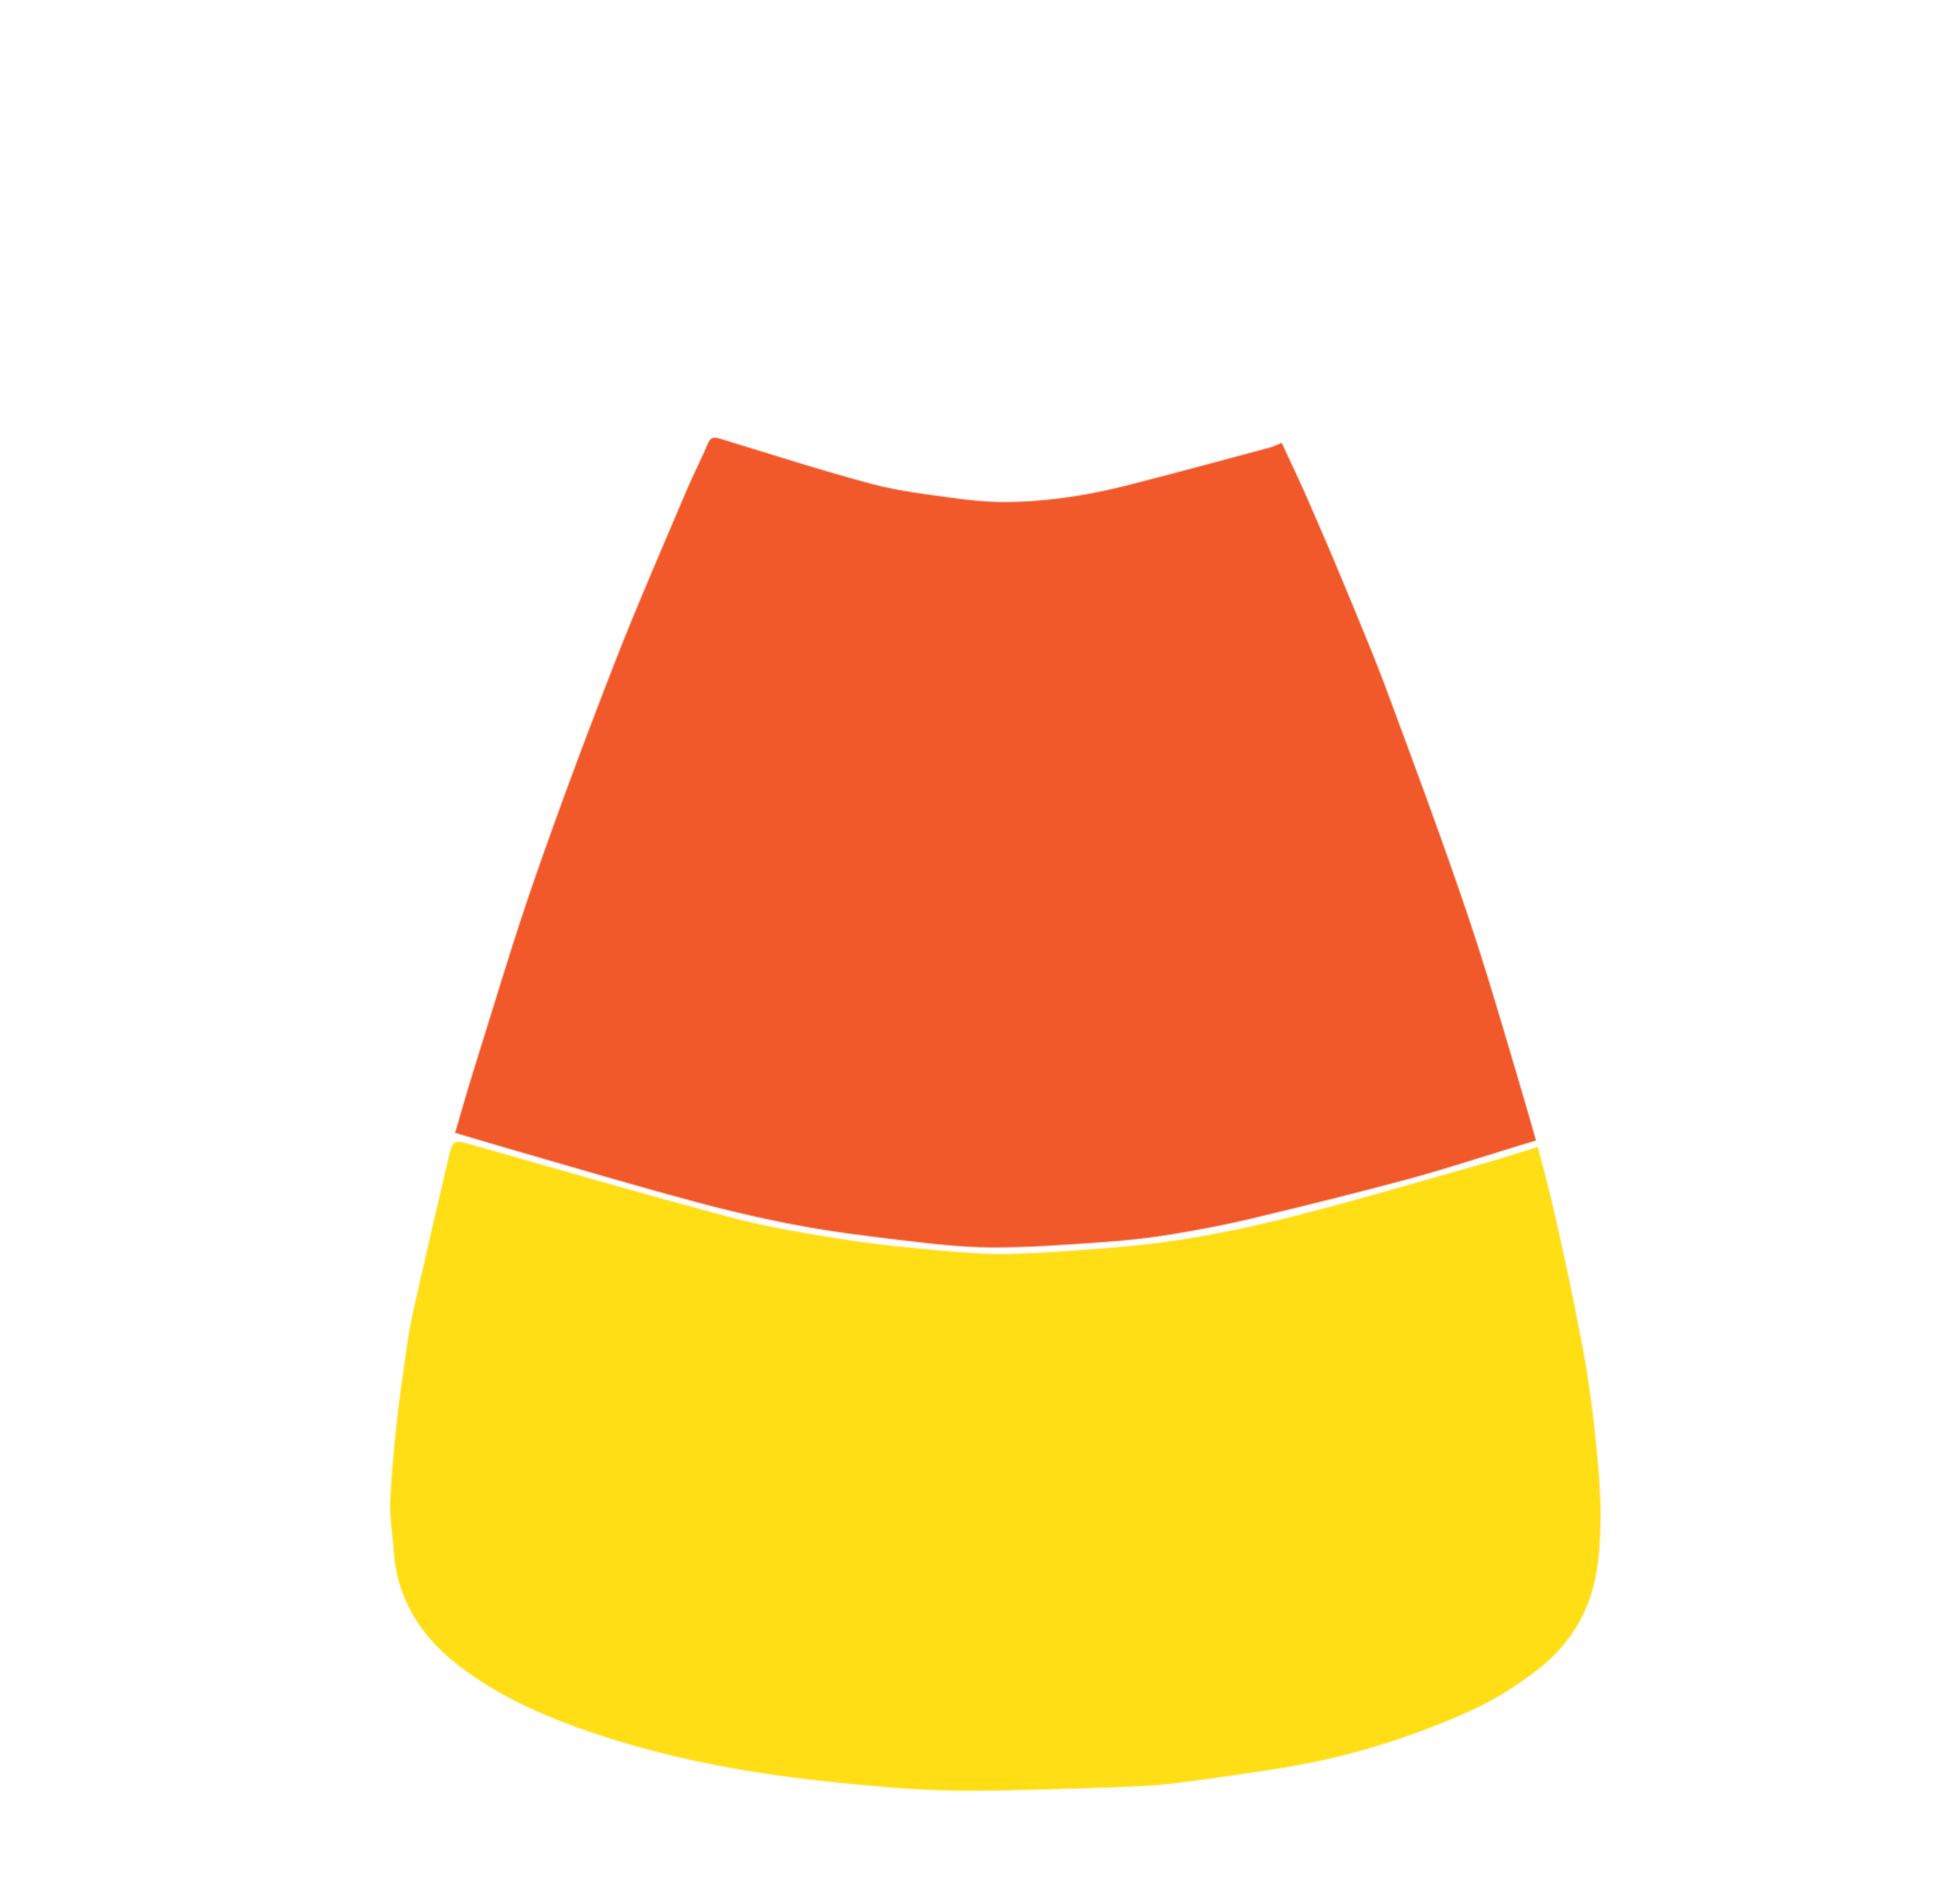 Candy Corn Clip Art | The Teehive